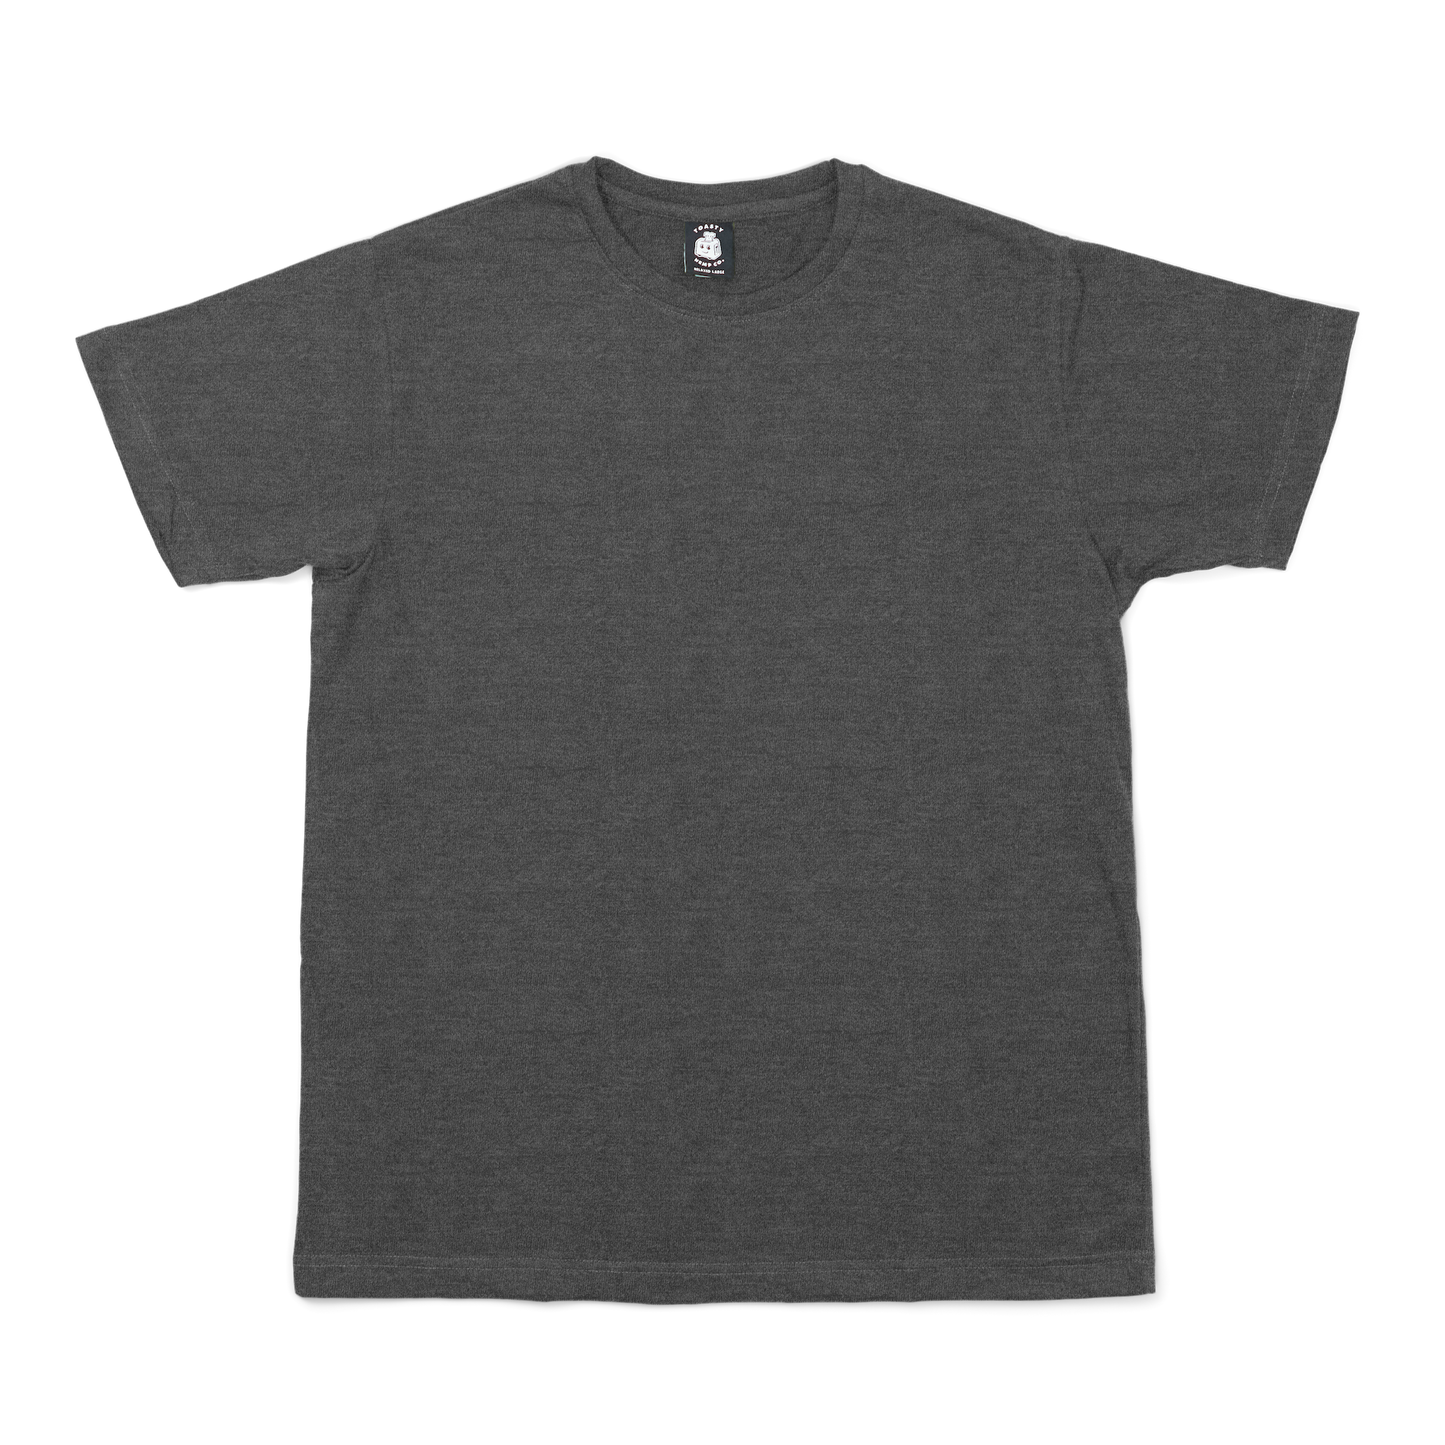 Relaxed Fit Hemp Tee - Charcoal Grey